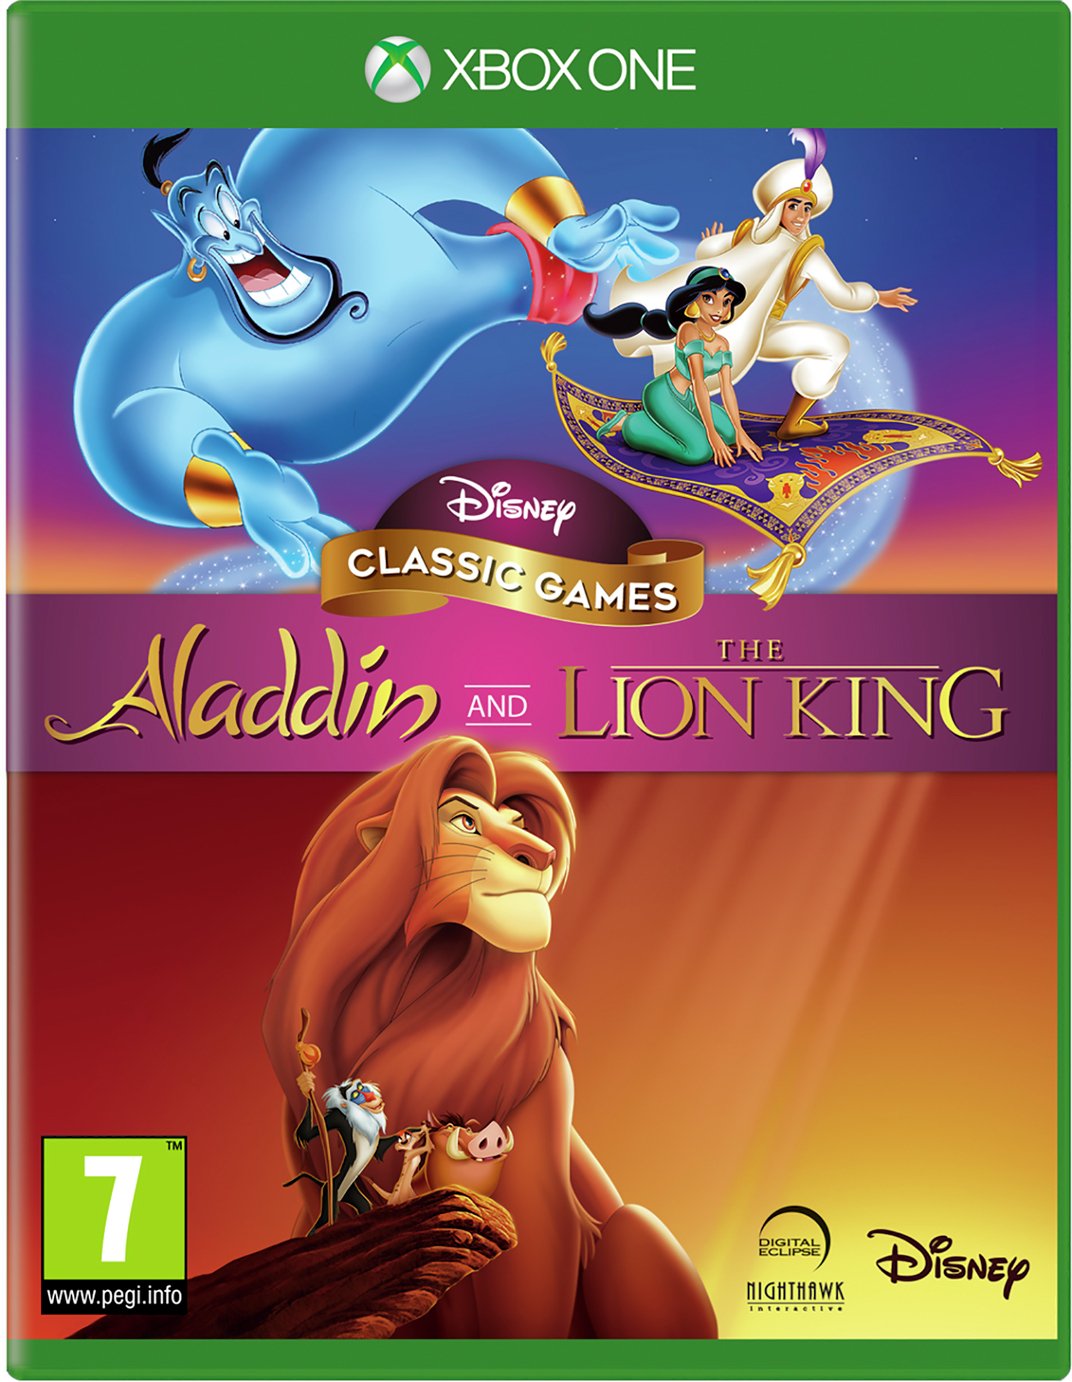 Disney's Aladdin & The Lion King Xbox One Game Review